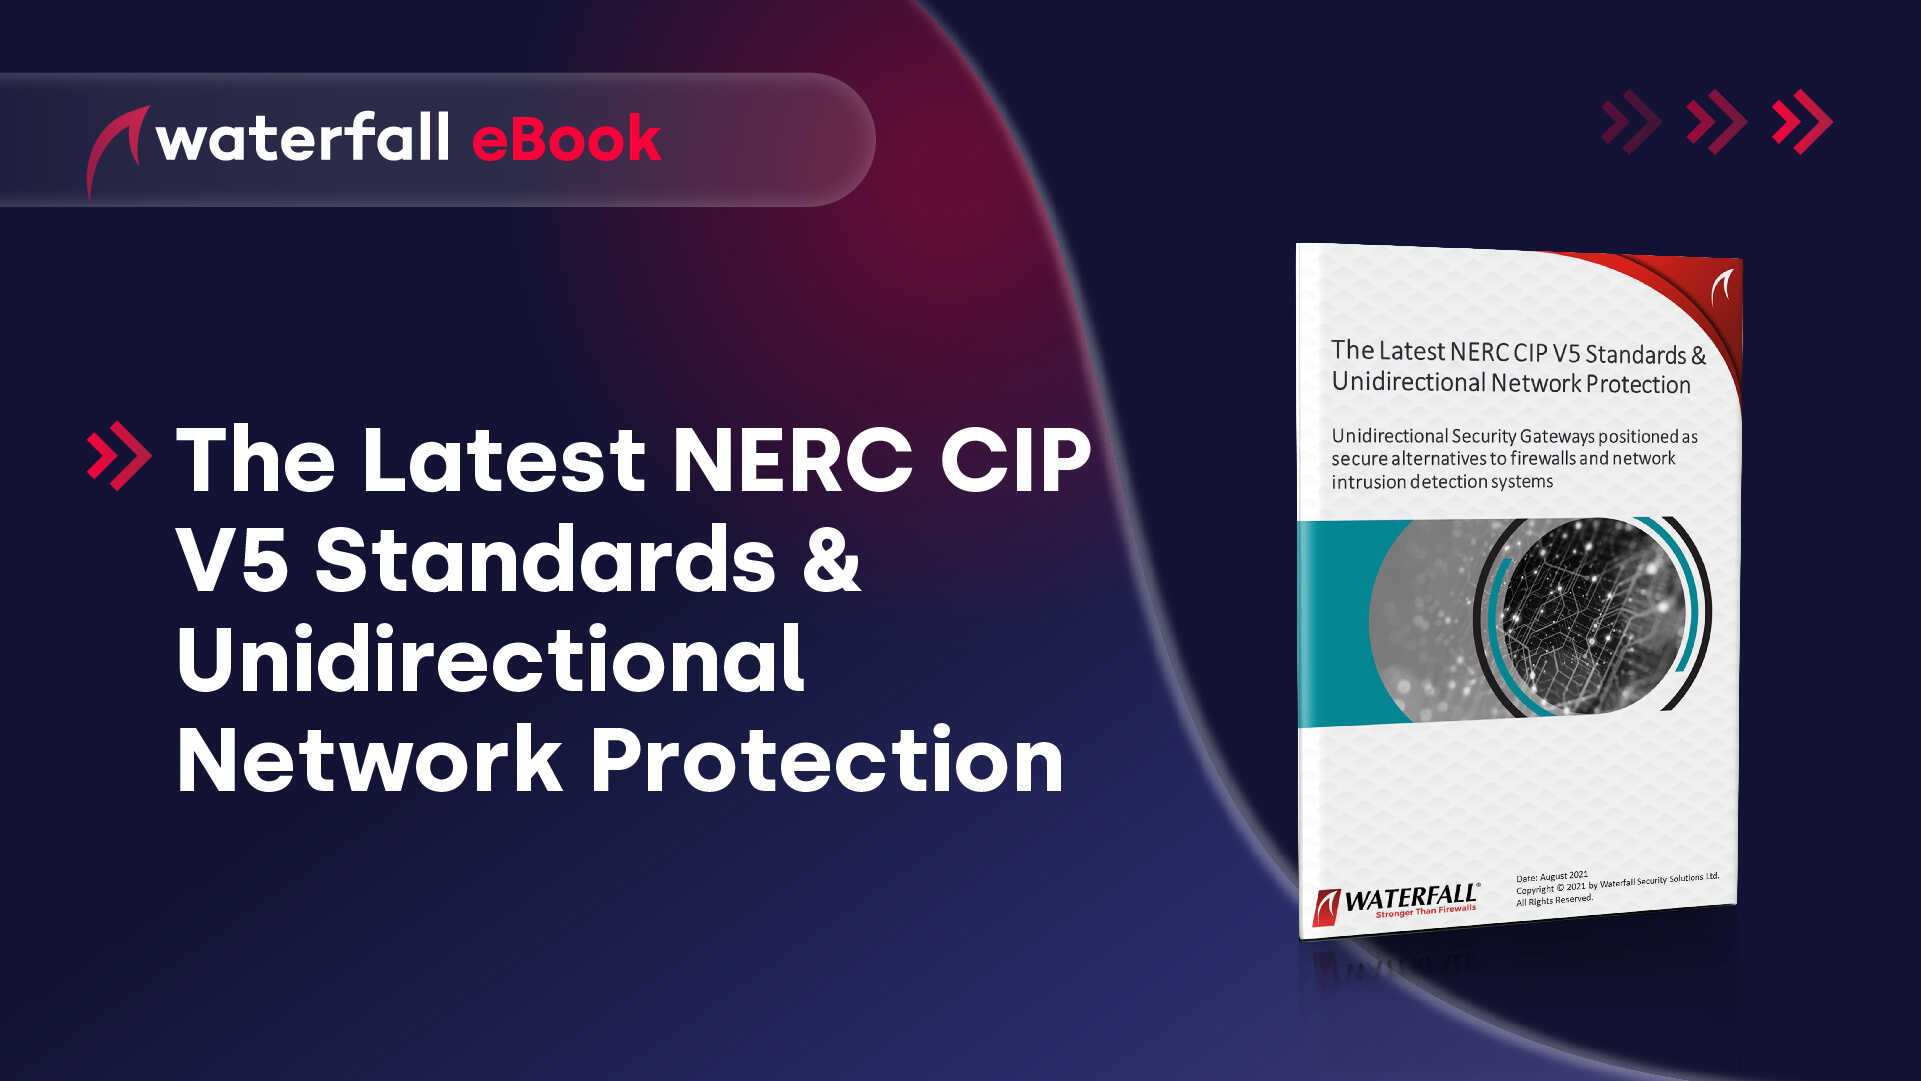 NERC CIP V5 Standards and Unidirectional Network Protection whitepaper